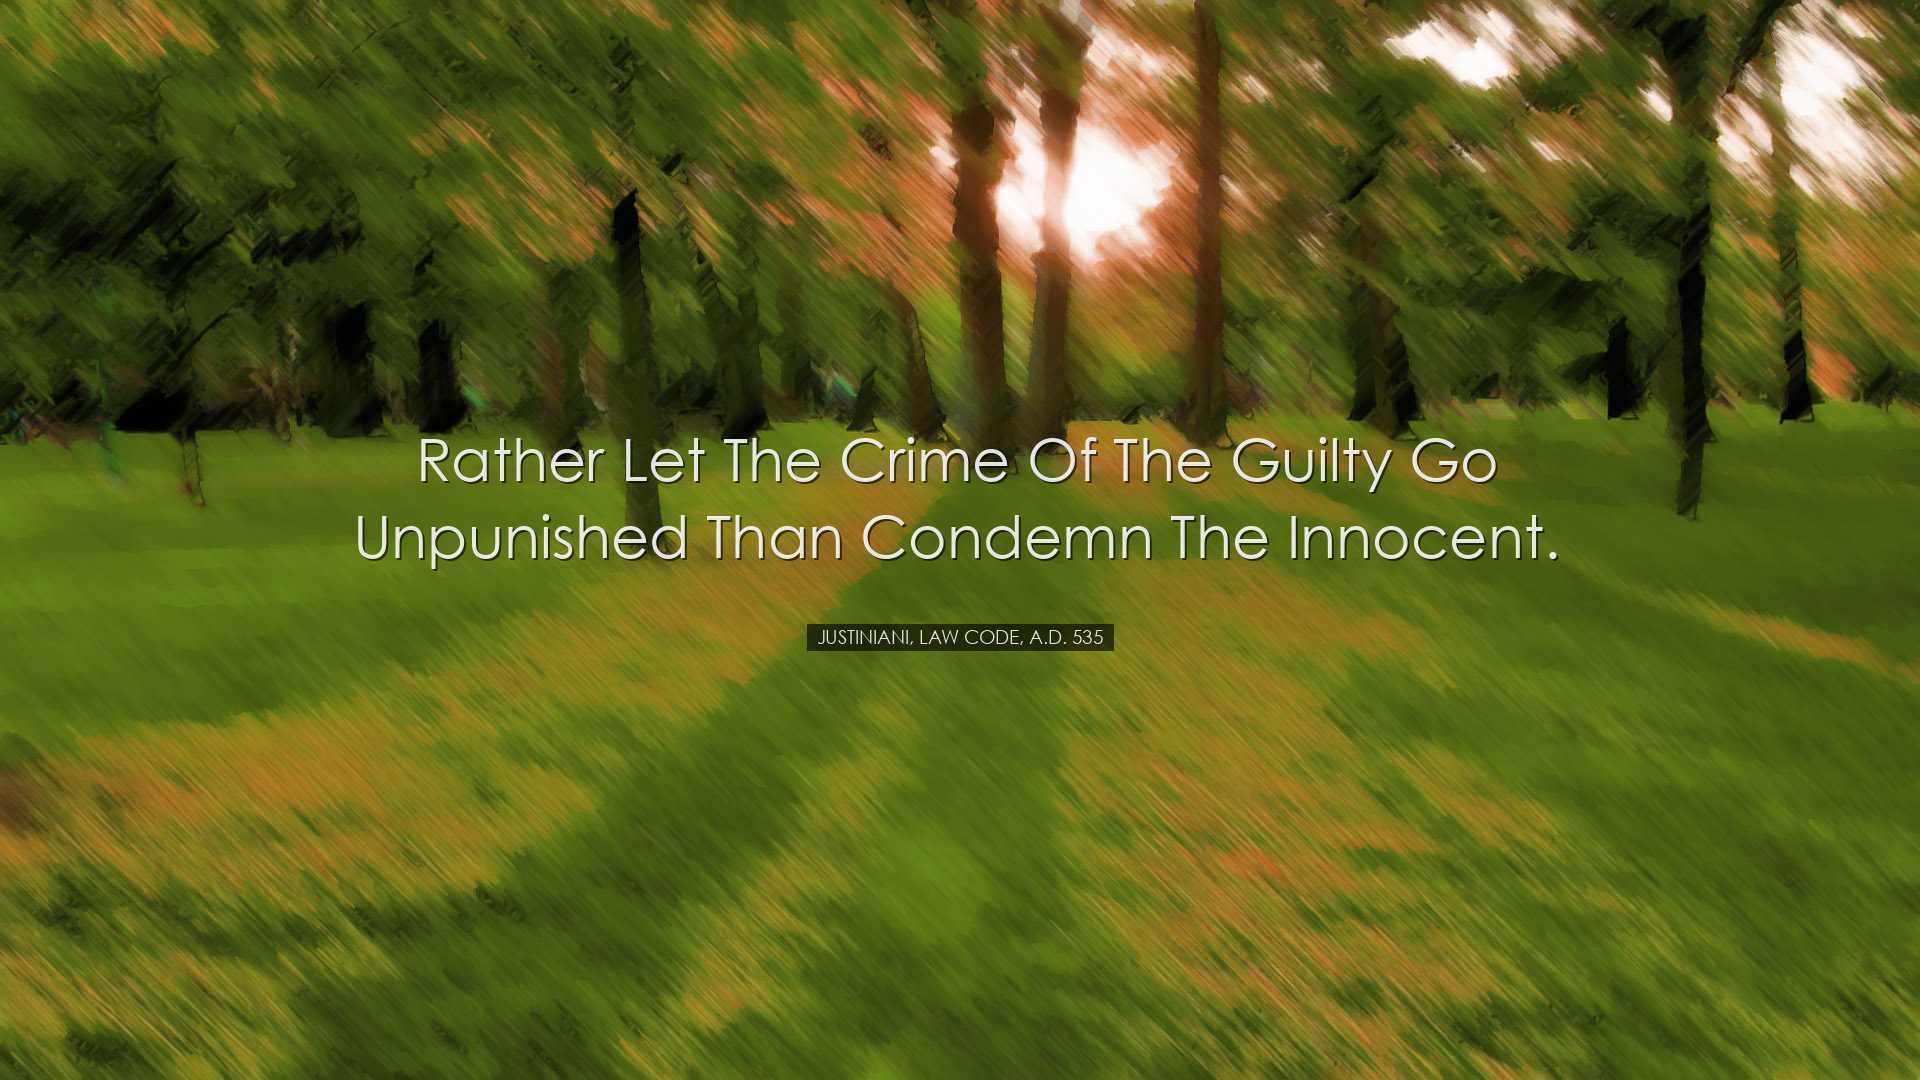 Rather let the crime of the guilty go unpunished than condemn the